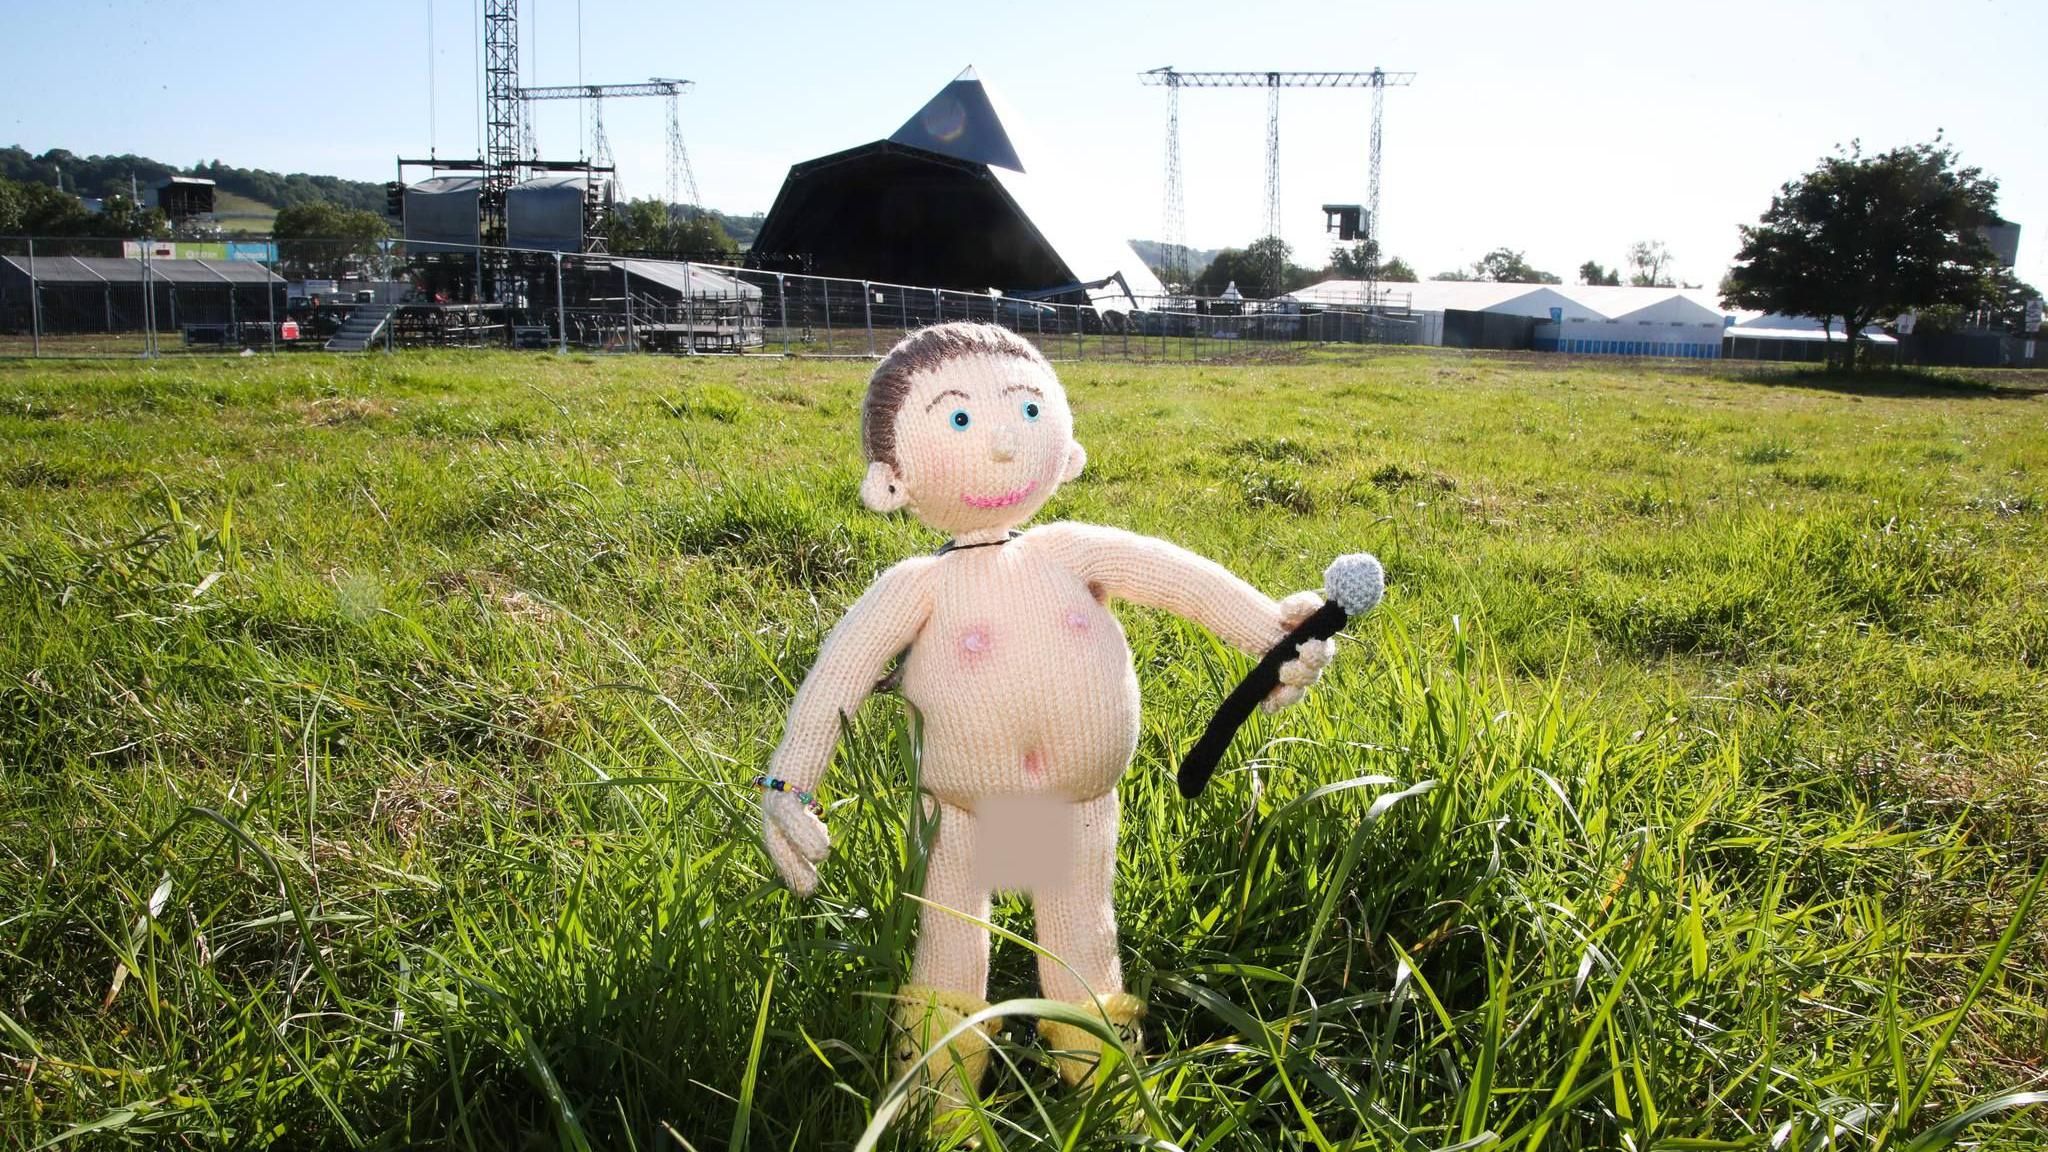 A knitted doll resembling Chris Martin standing on the grass in front of Pyramid Stage at Glastonbury. The doll is naked and holding a microphone